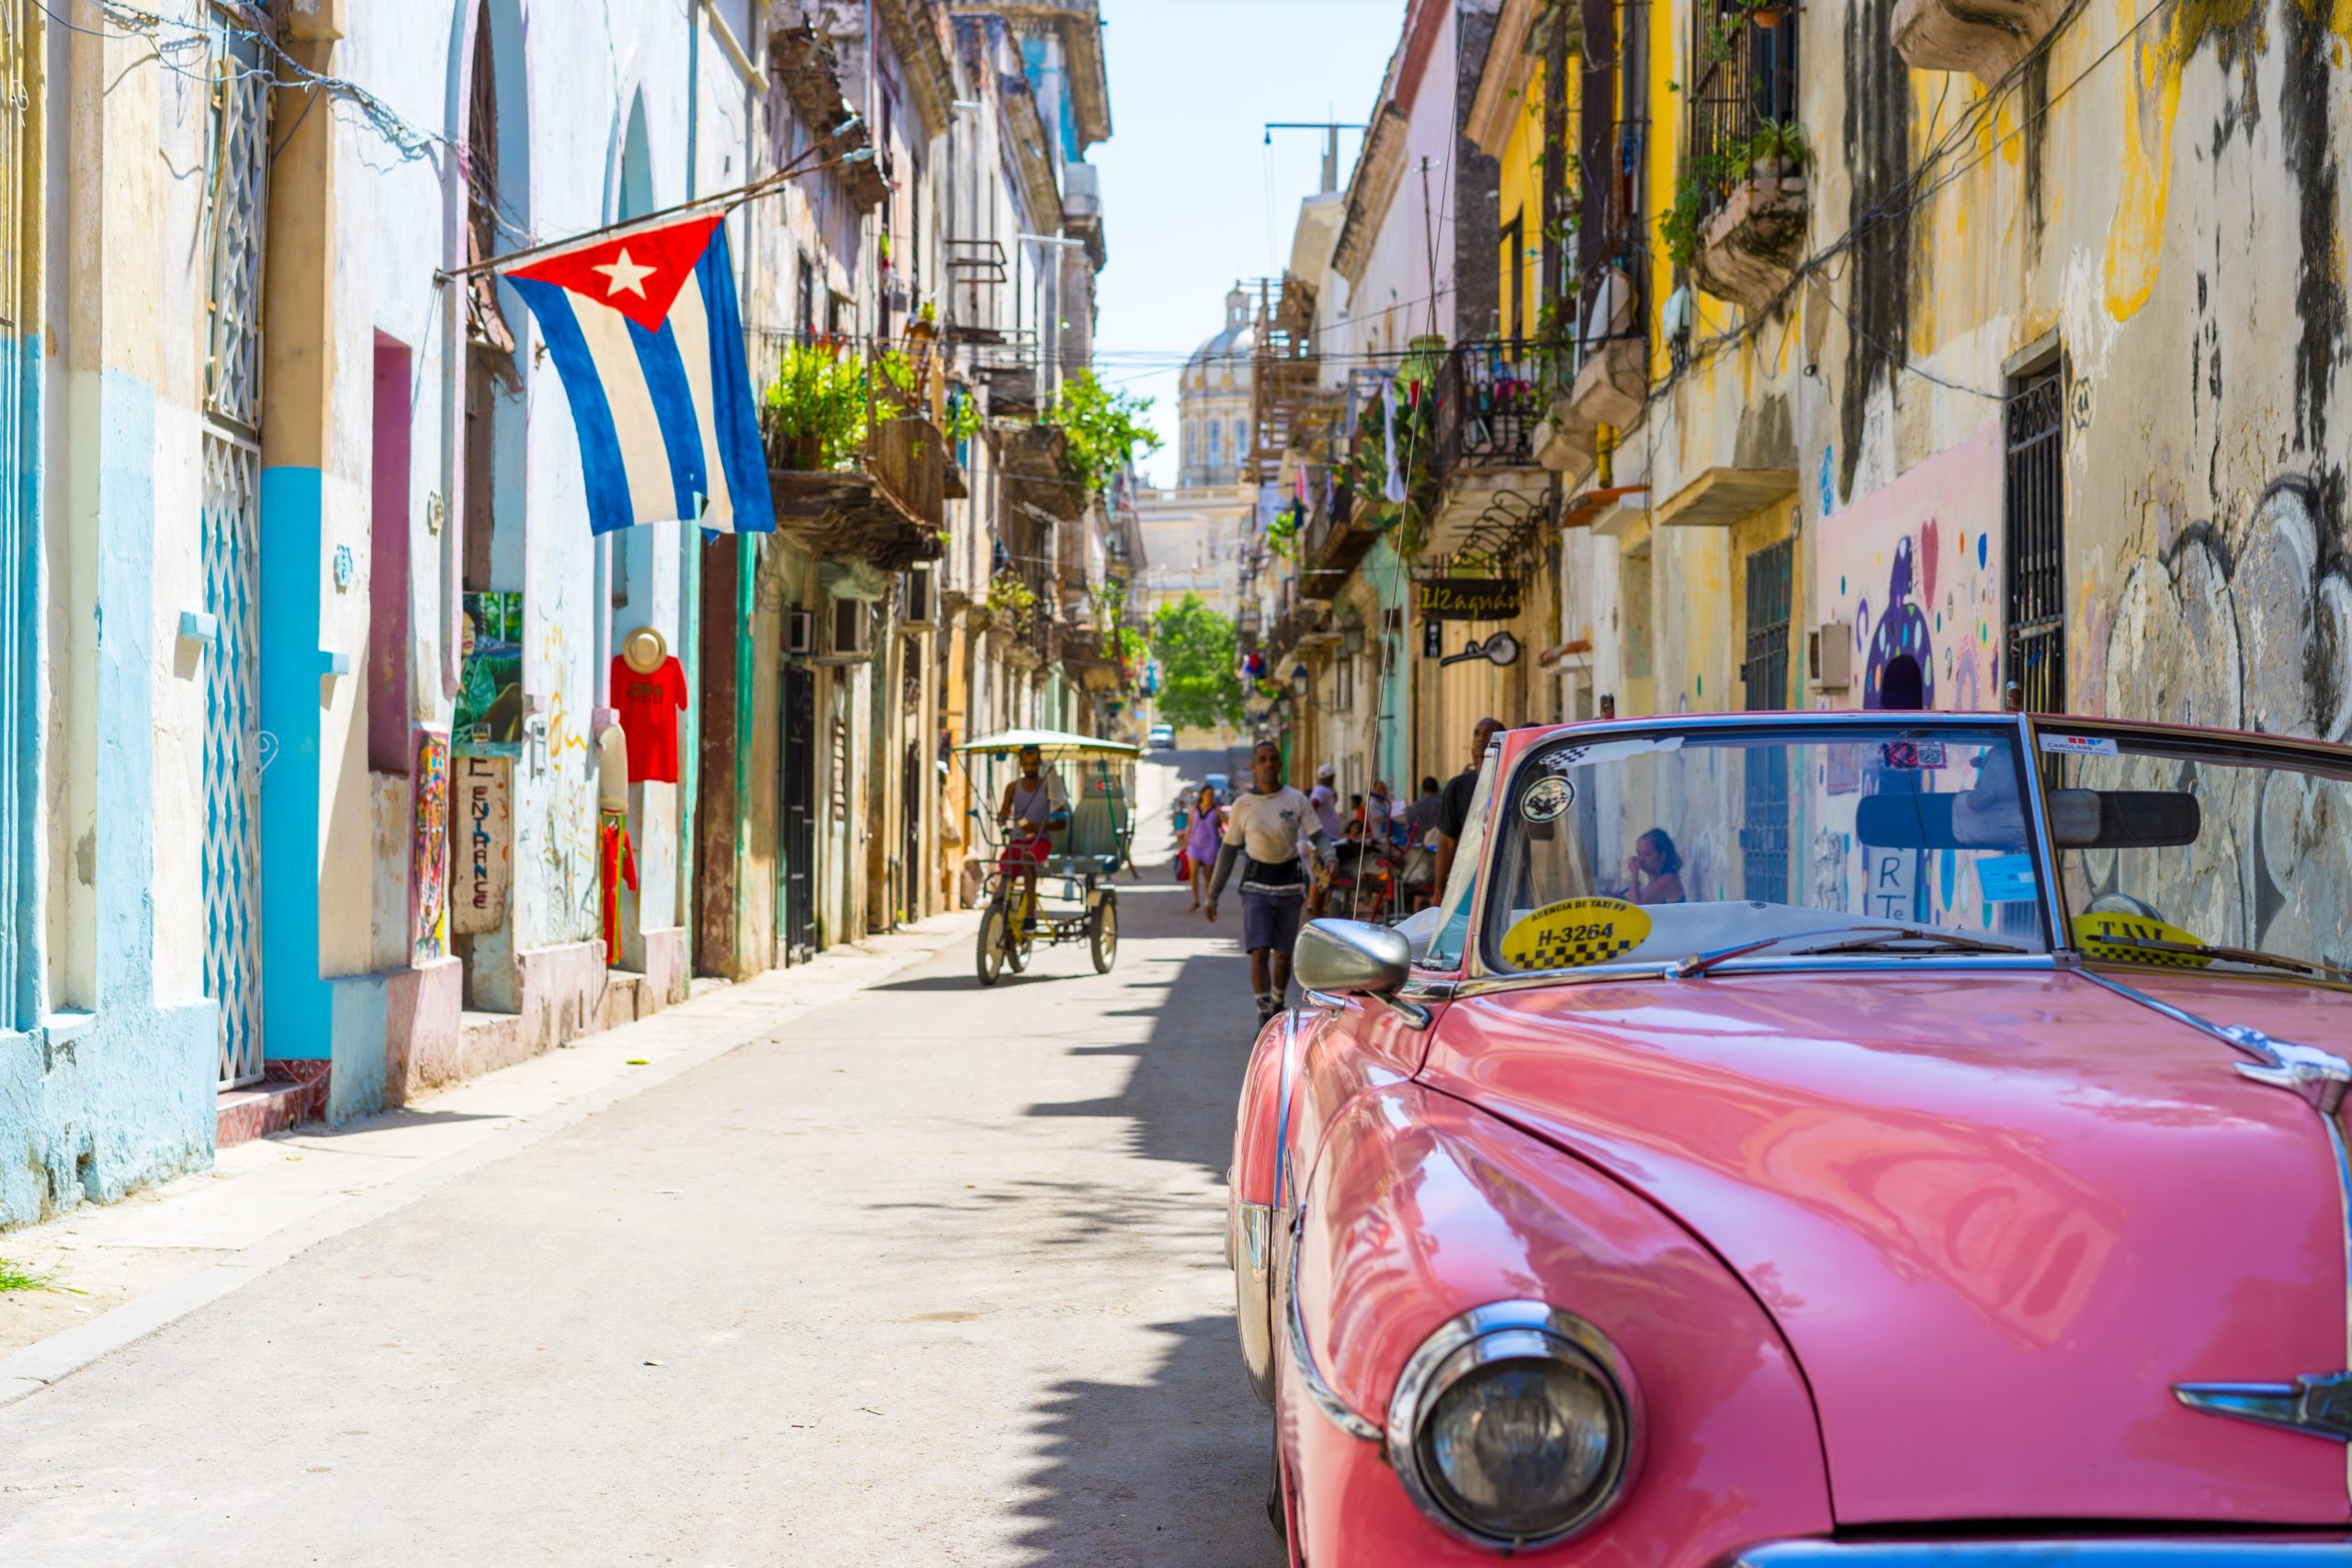 Sanctions are the Fuel to Cuba’s Fire